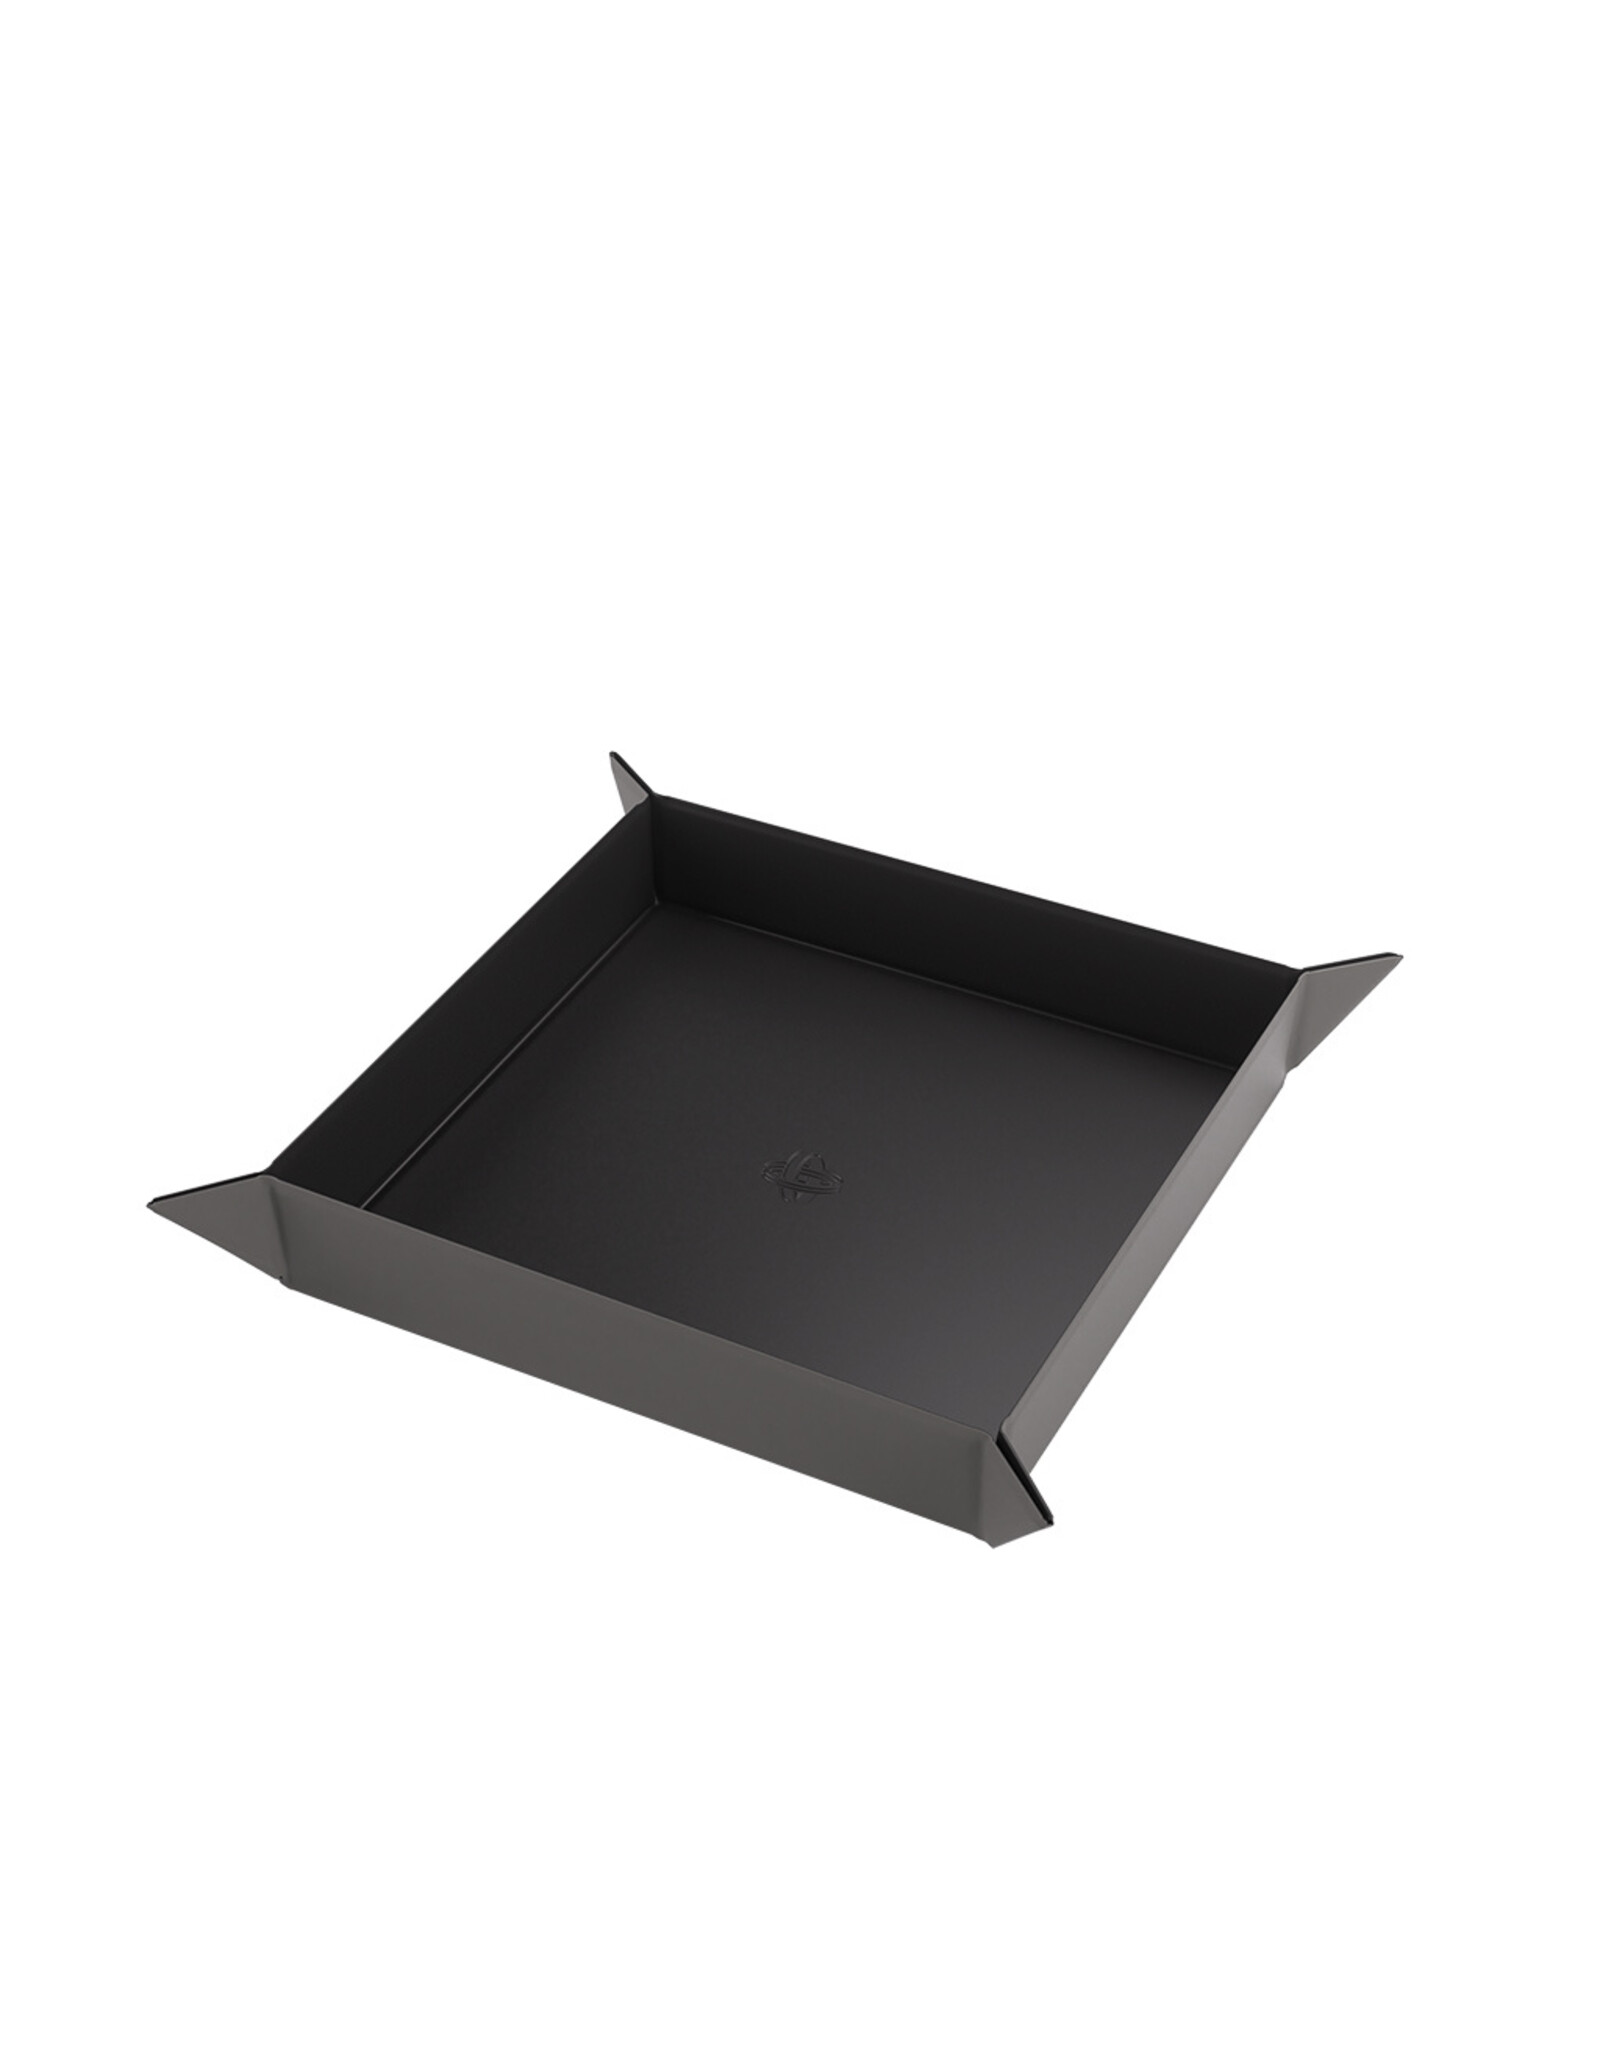 GameGenic Magnetic Dice Tray Square Black/Gray